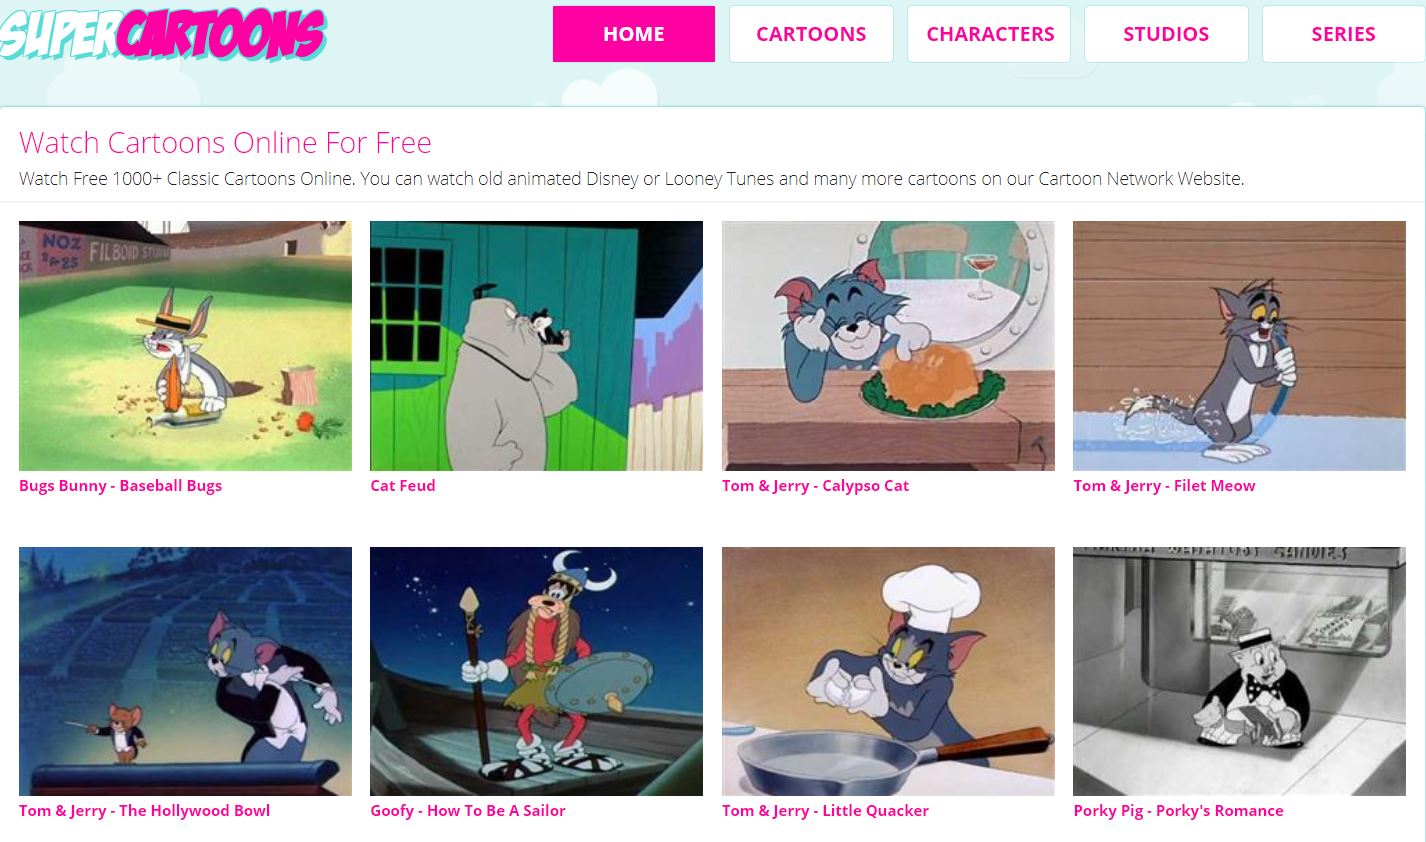 10 Best Websites to Watch Cartoons for free in 2021 - H2S Media